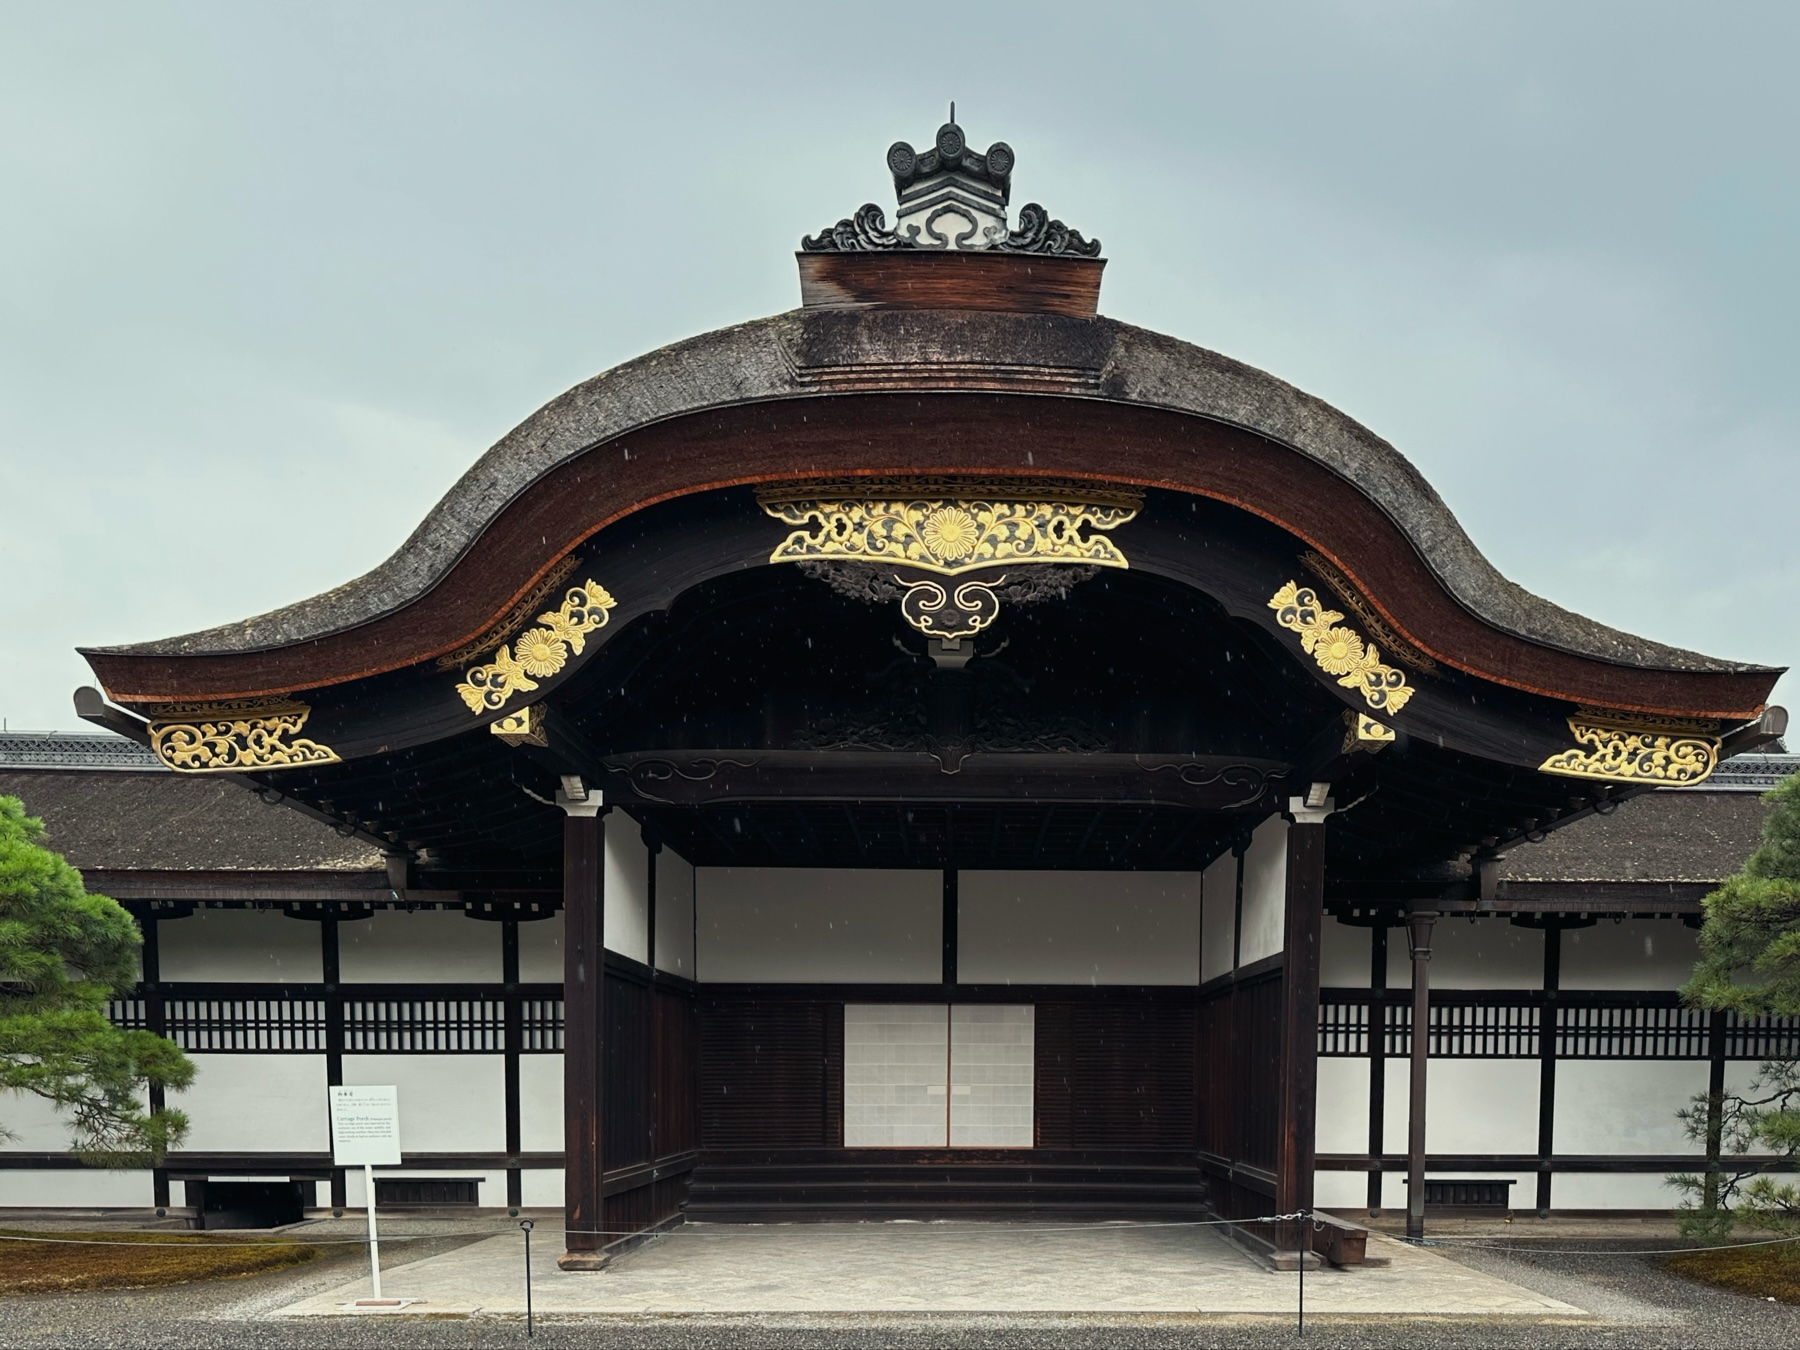 A decorative carriage stop at the imperial palace